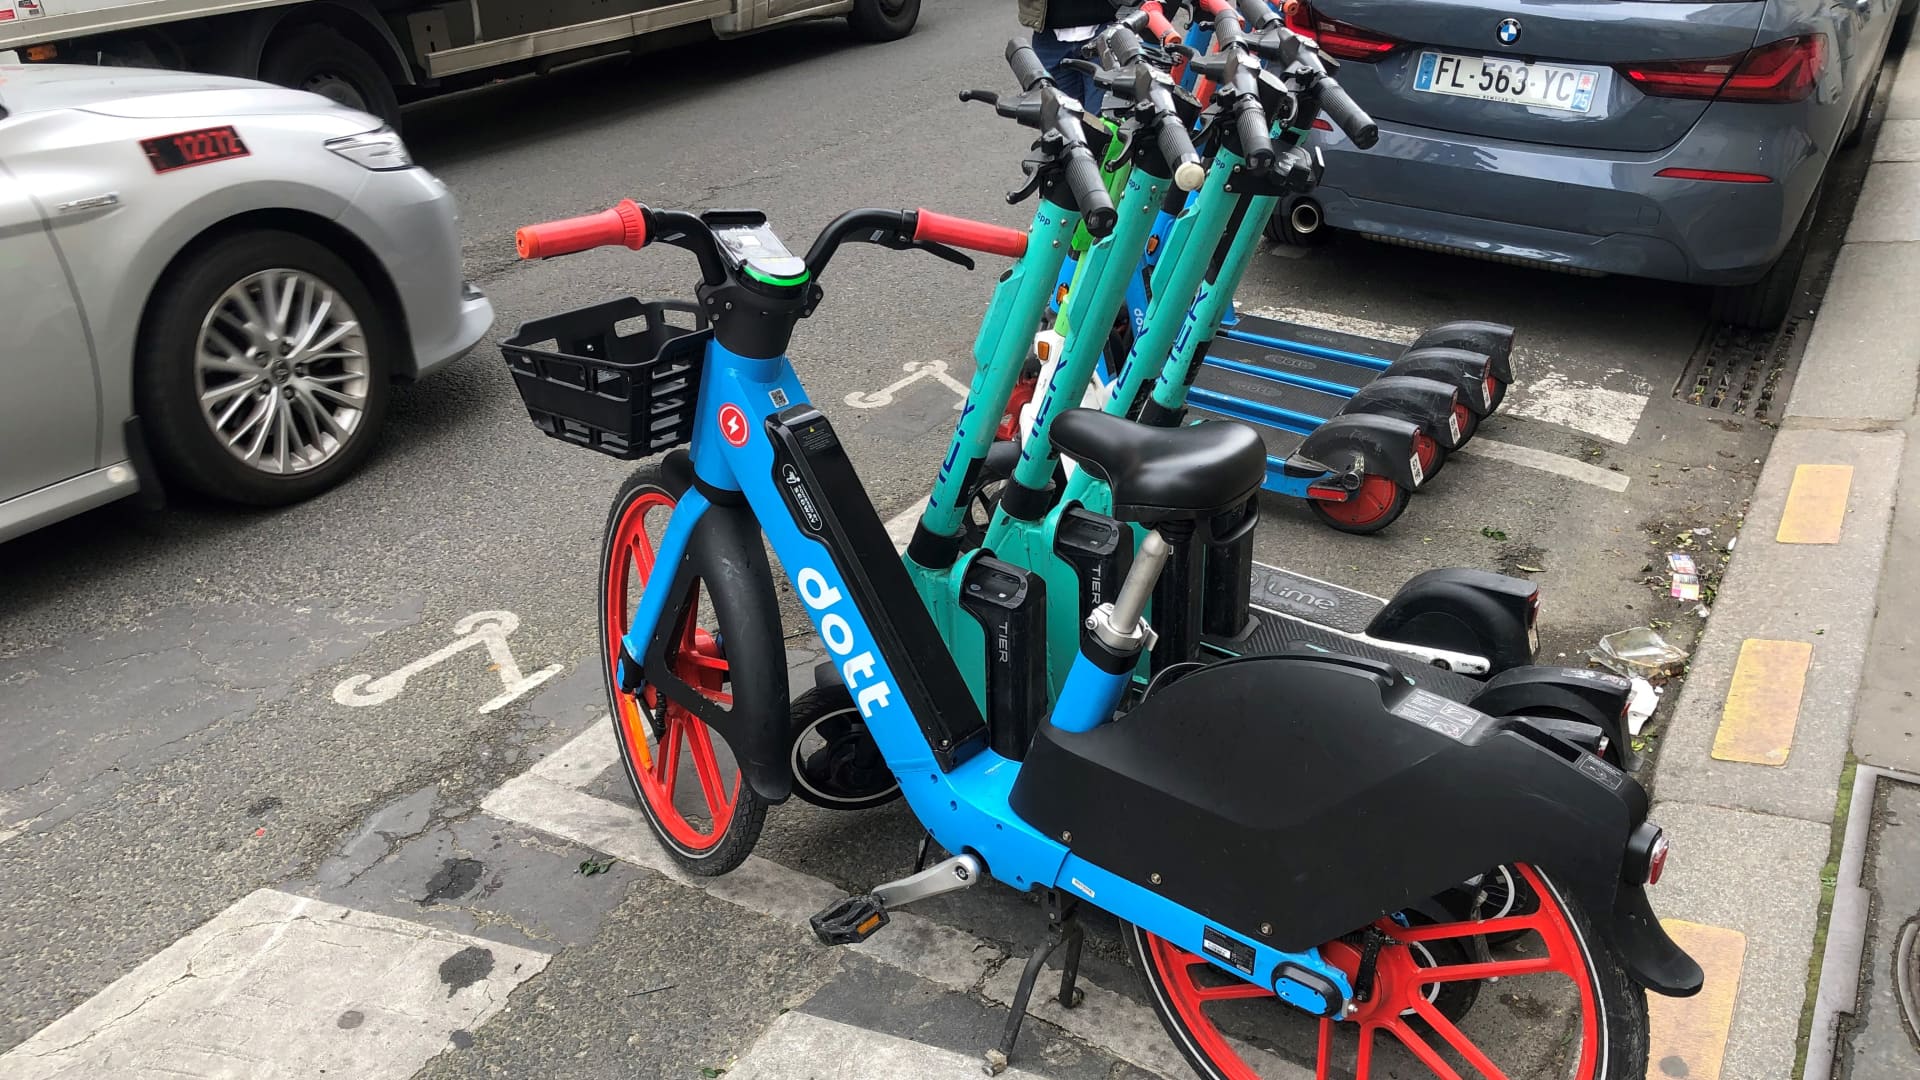 E-scooters and an e-bike are parked in a designated parking space.